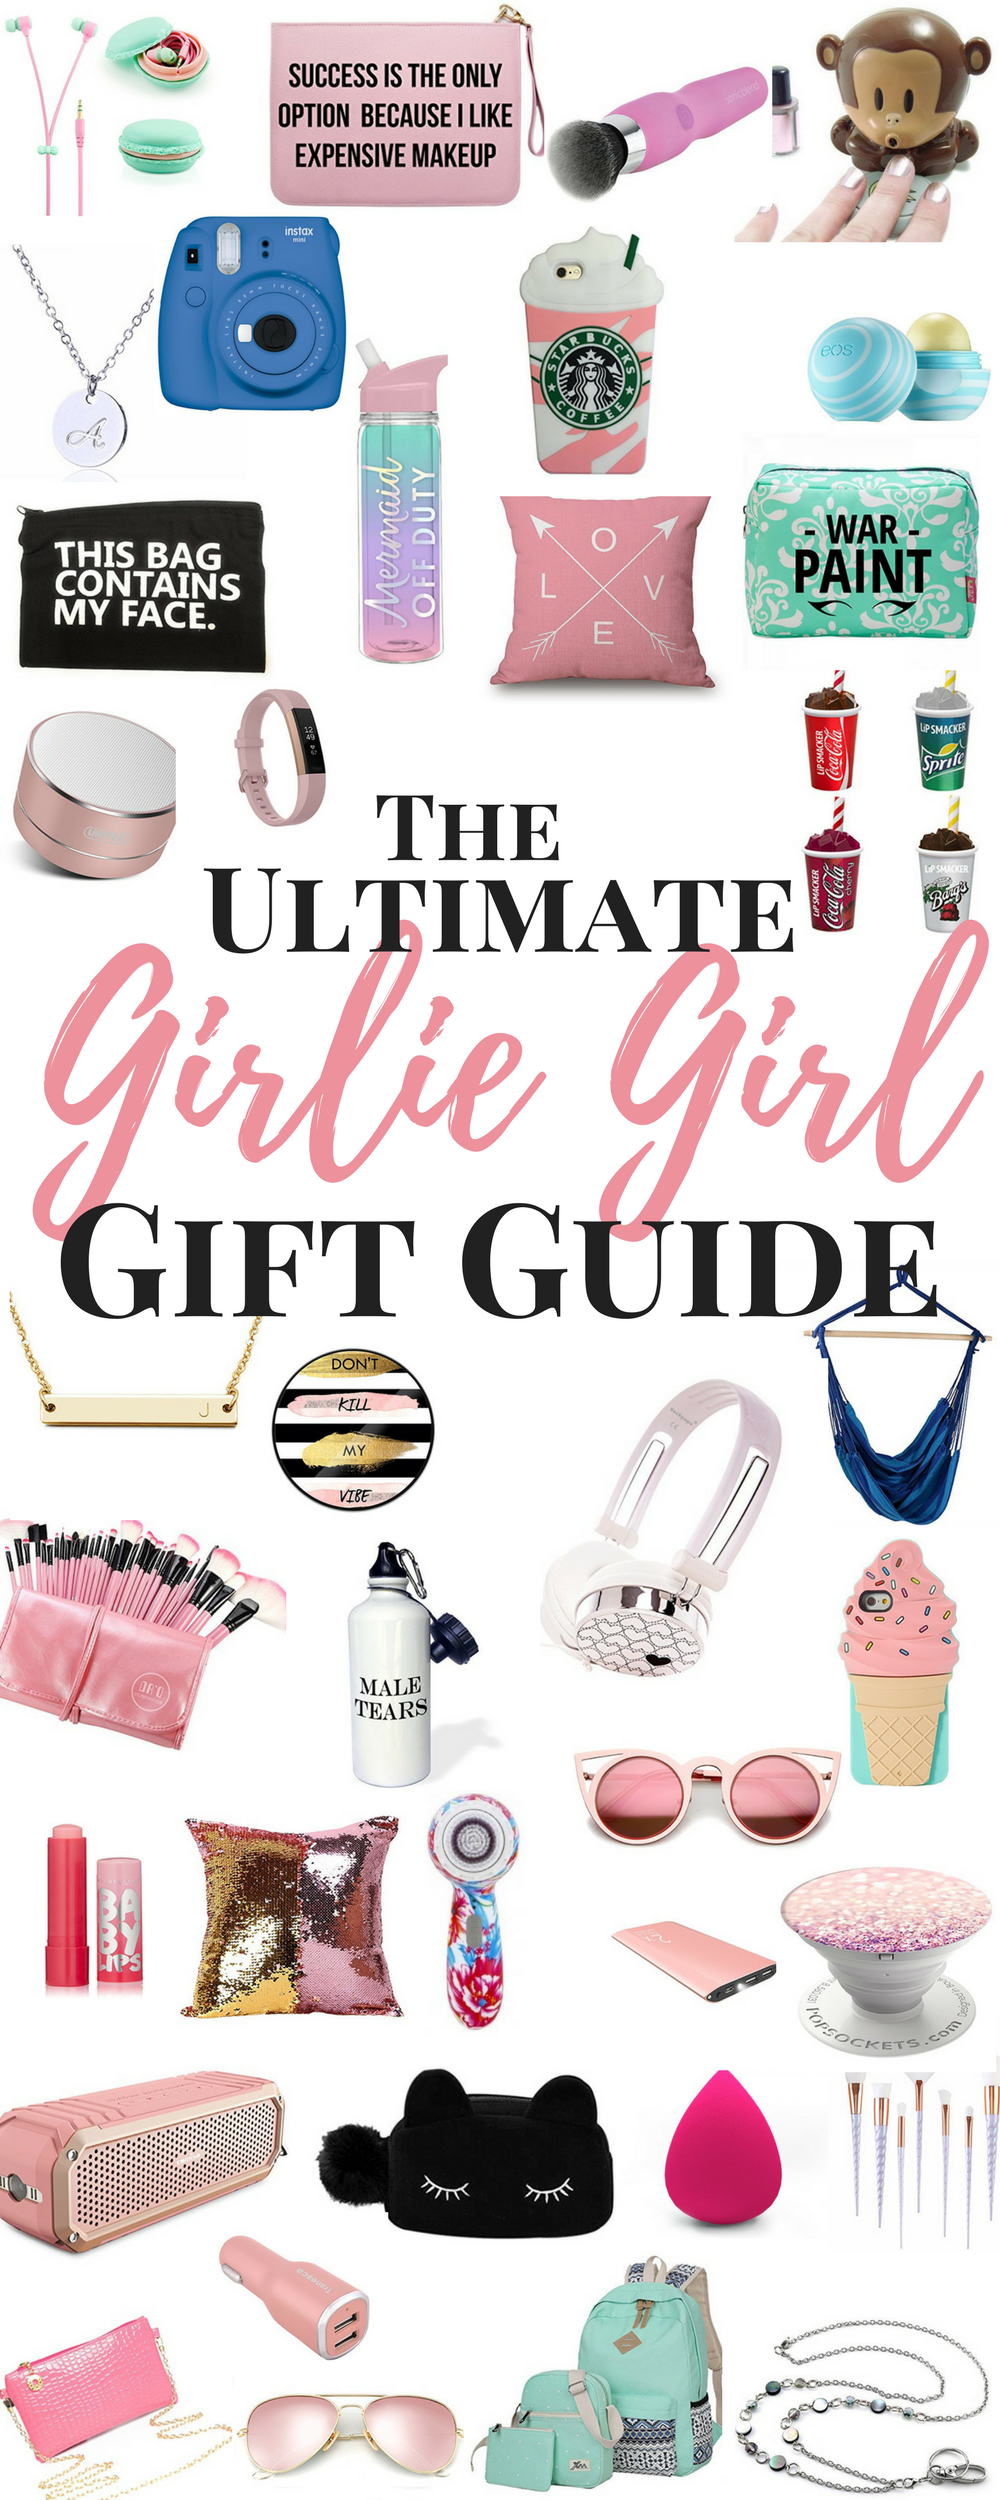  Gift Ideas for her - Girlie Girl Gift Guide. Looking for gift ideas for your best friend/bestie? Maybe a gift idea for teenage girls, or gift ideas for other women in your life? Here is a great Gift Guide for her. Lots of Gifts for the girly girl on your list! 